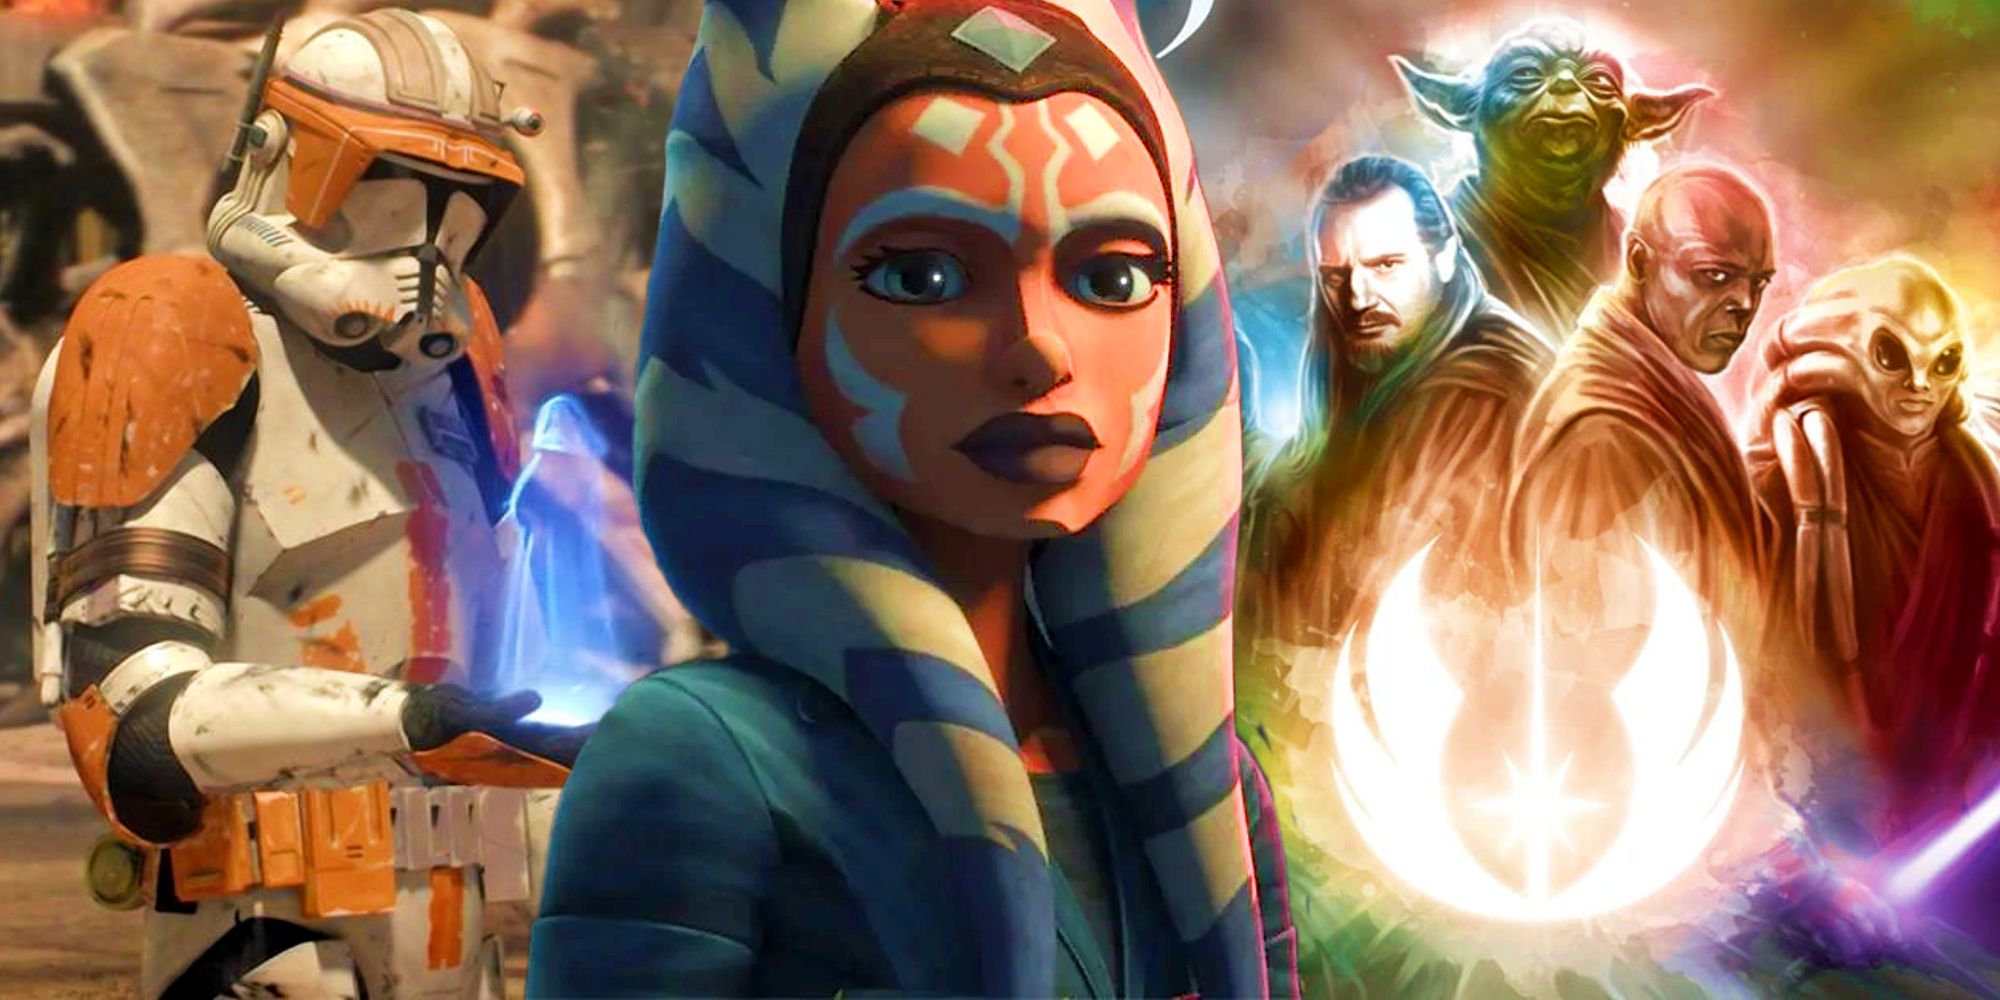 Ahsoka from Star Wars: The Clone Wars season 7 between Cody receiving Order 66 and the prequel Jedi Order